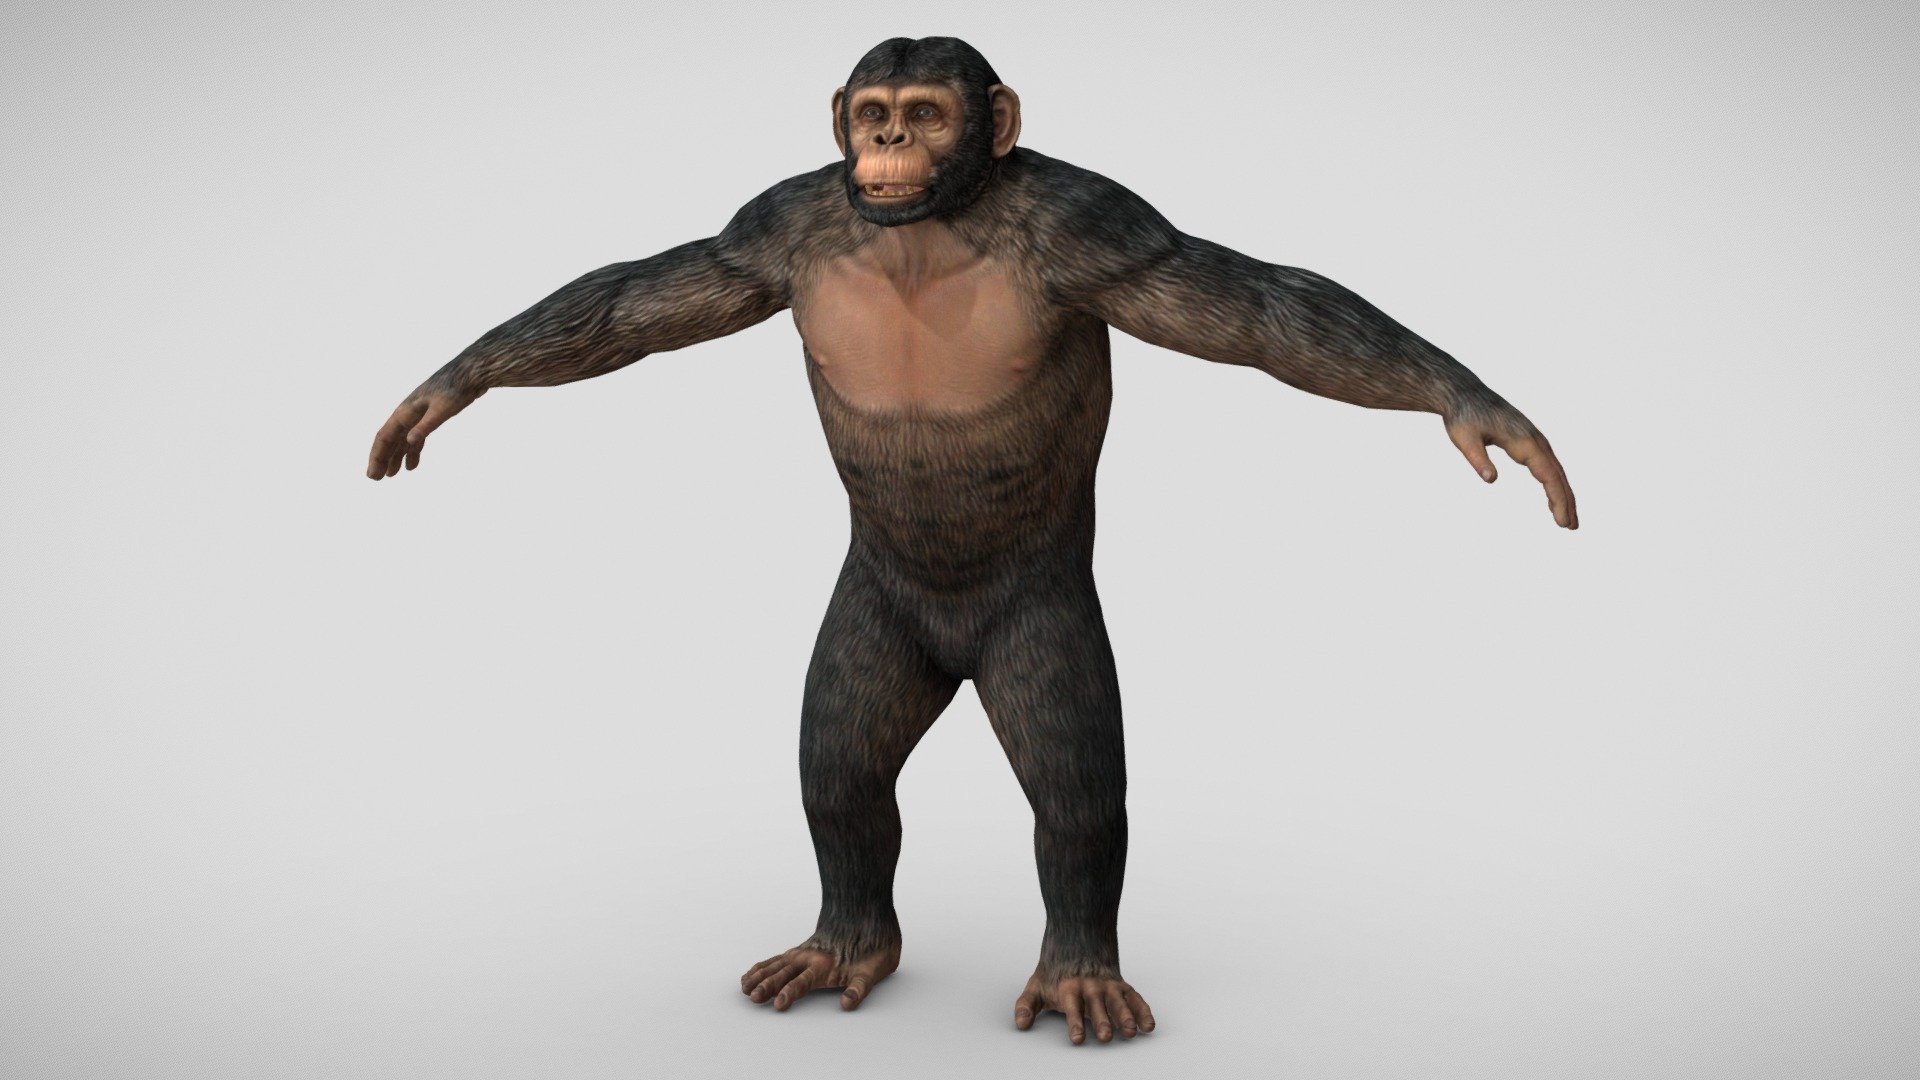 A low-poly Chimpanzee model with textures.

Normal map is provided in 4096 and 8192 sizes.

Color, Specular/Gloss, Occlusion, and Cavity maps are 4096.

Collada, FBX, and OBJ formats included 3d model